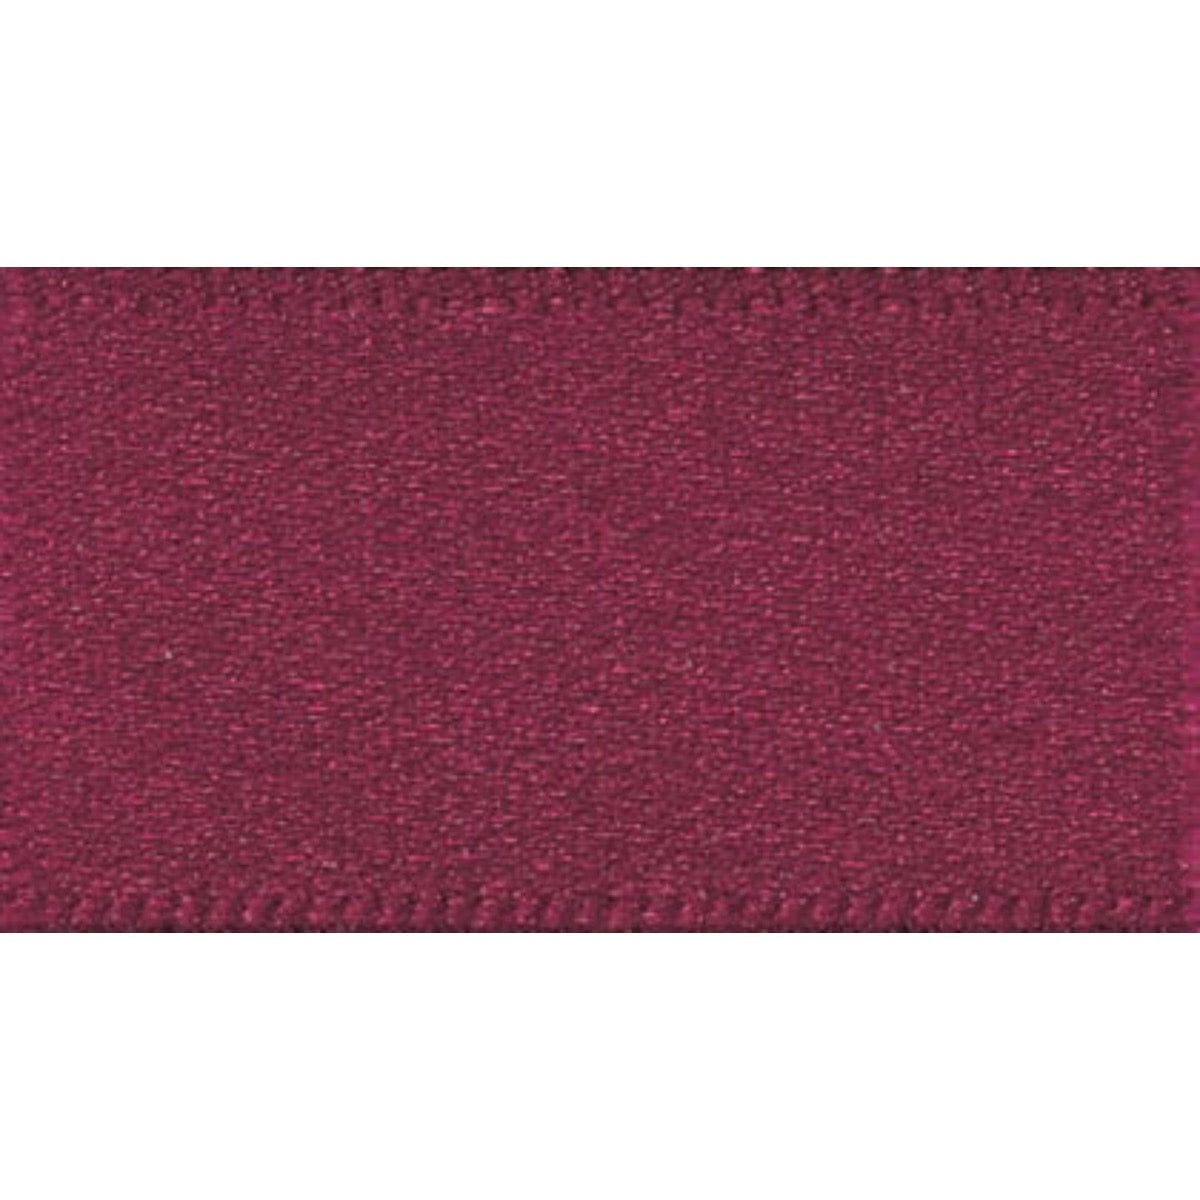 Double Faced Satin Ribbon Burgundy Red: 25mm wide. Price per metre.